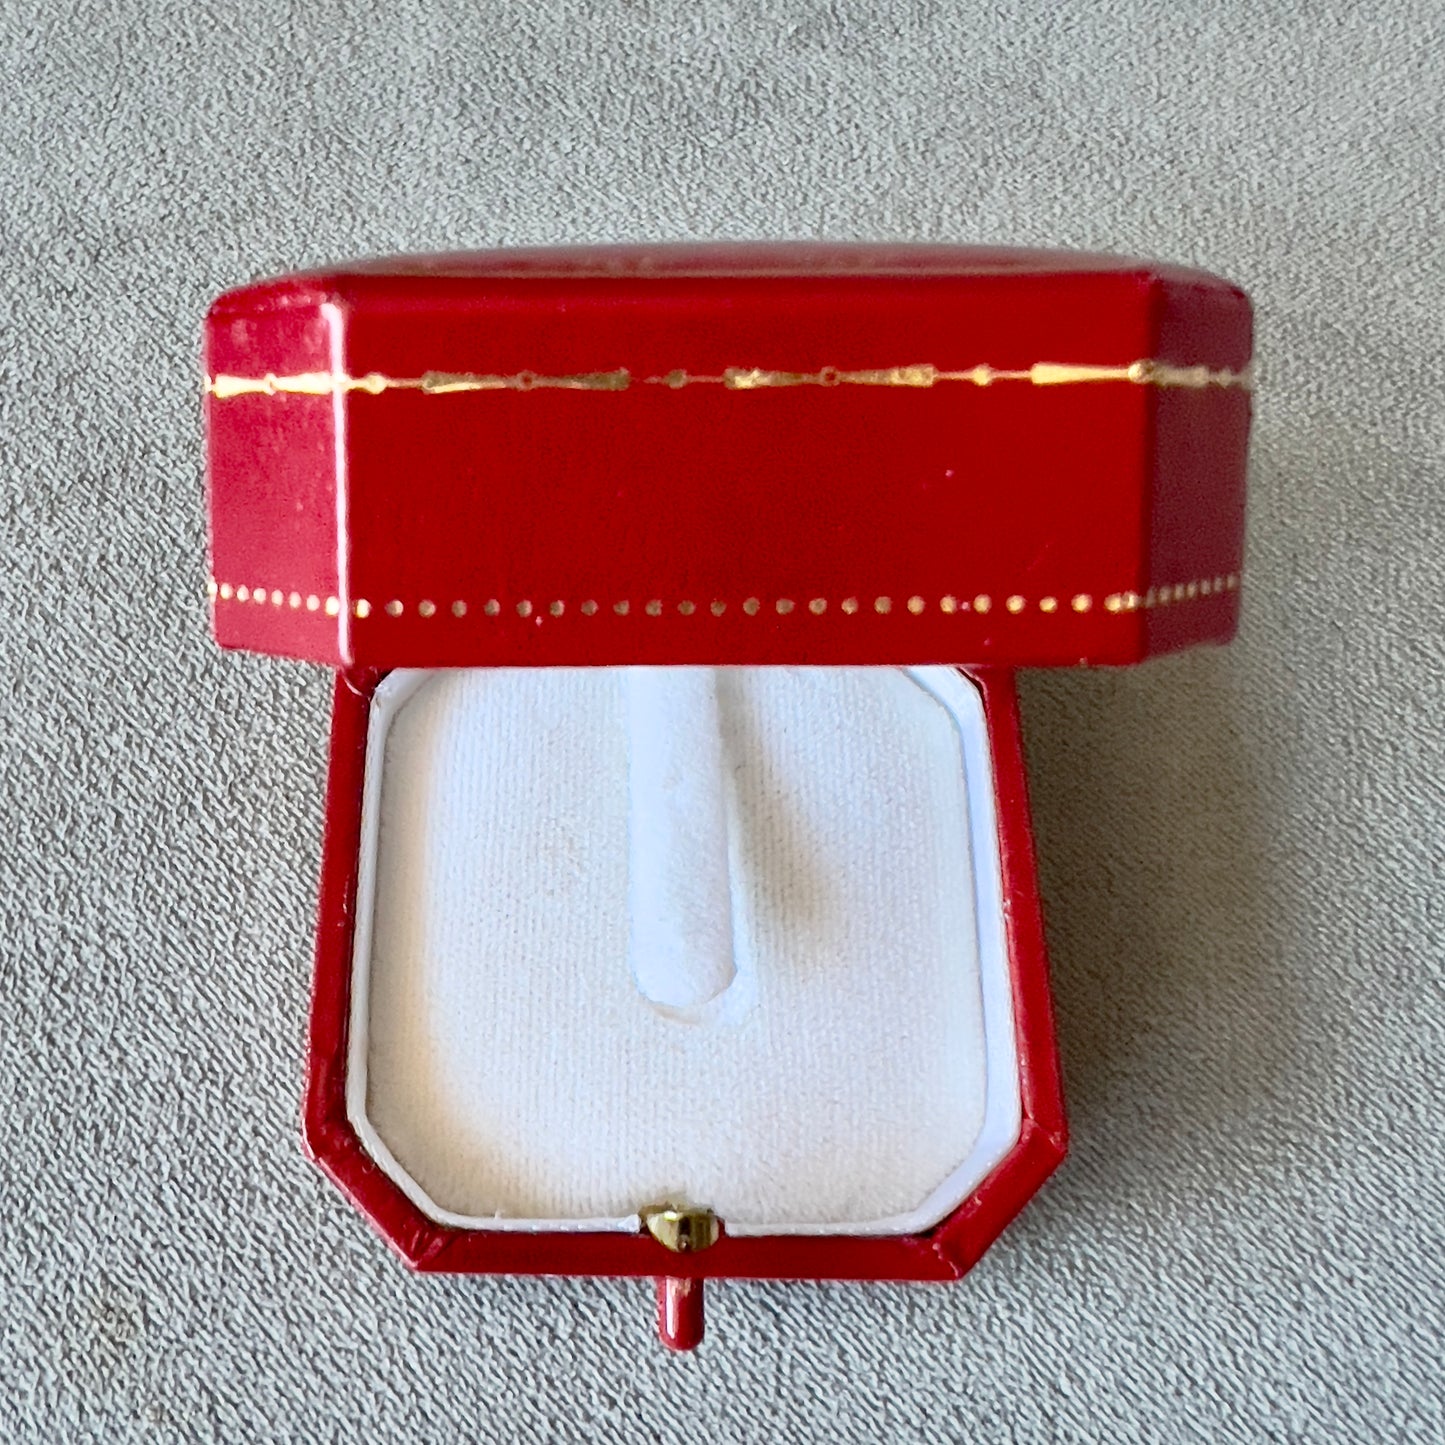 CARTIER Ring Box 1.90x1.90x1.25 inches